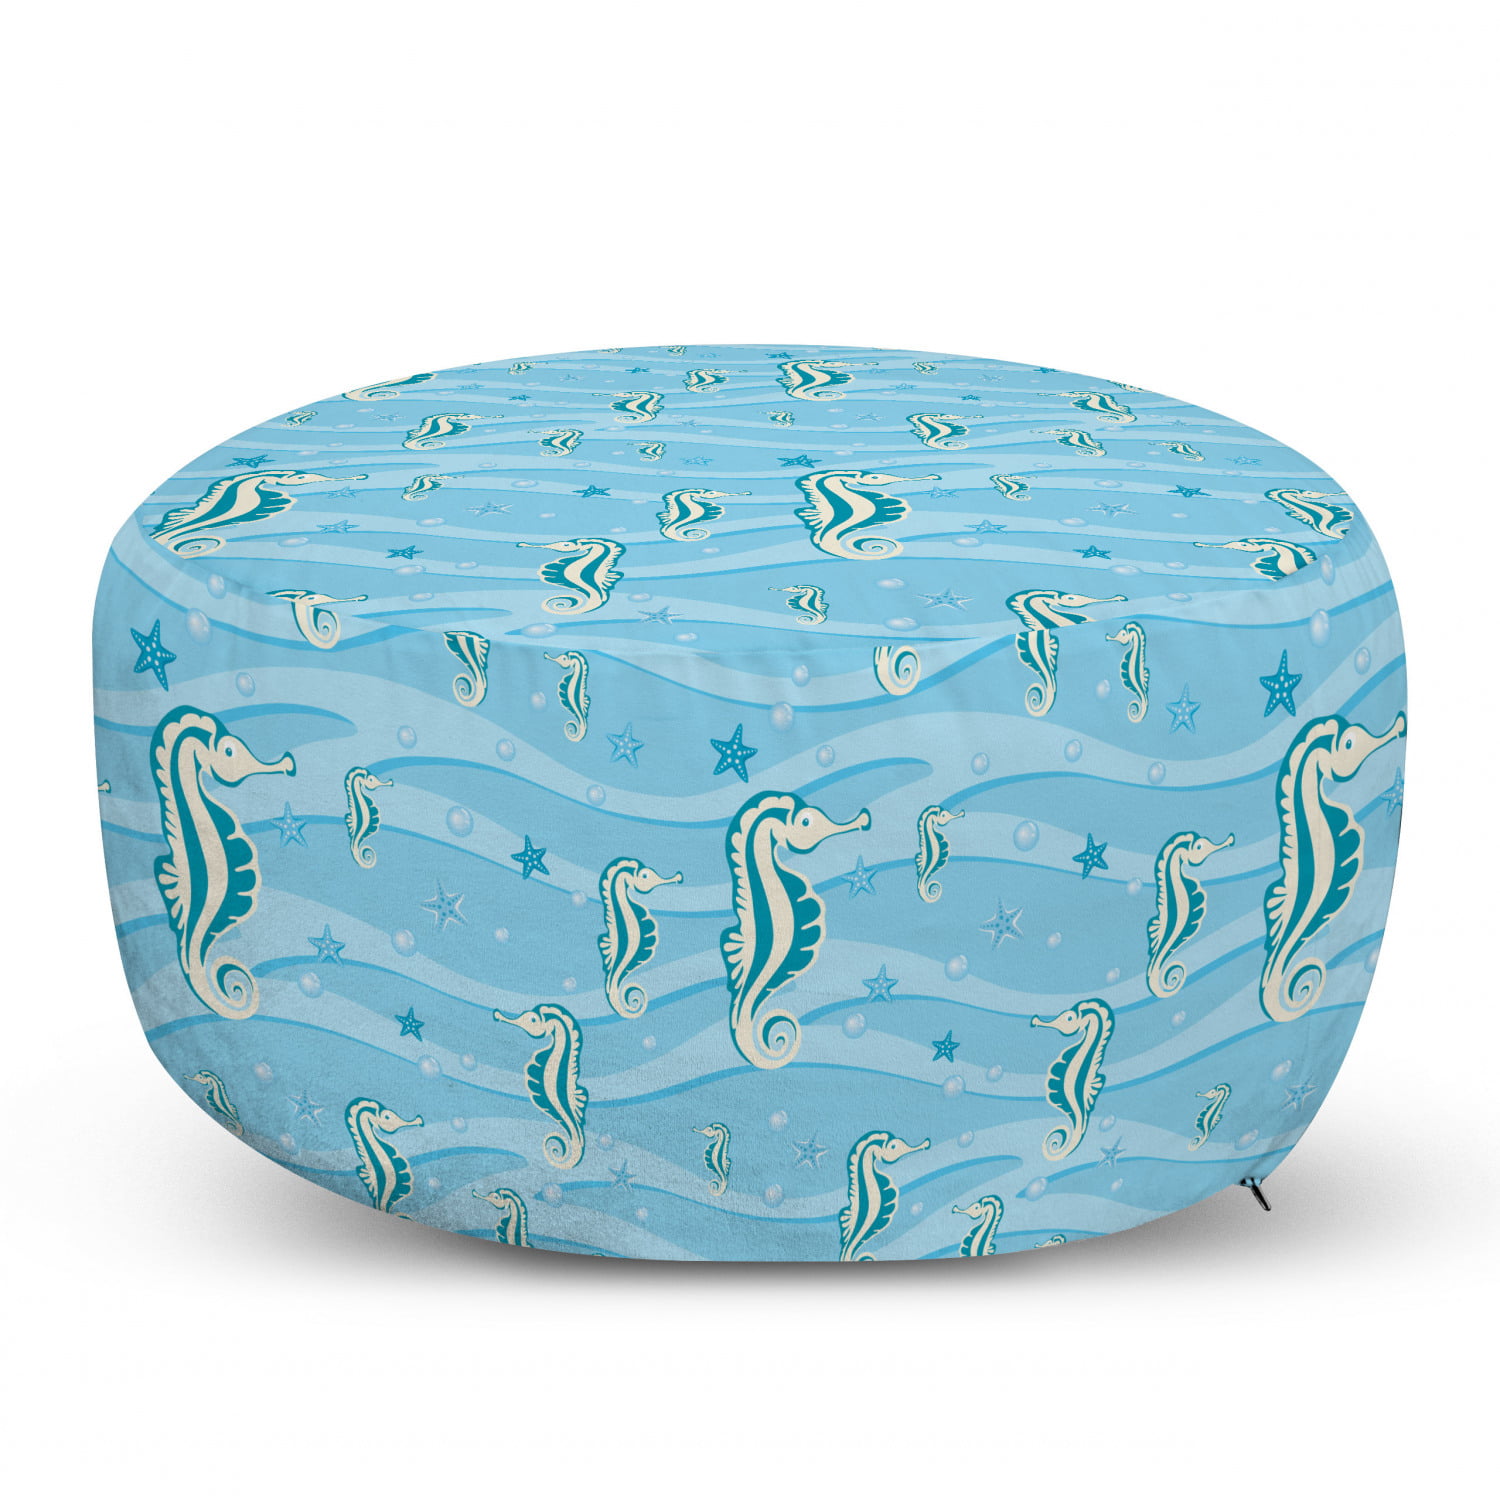 25 Under Desk Foot Stool for Living Room Office Ottoman with Cover Multicolor Ambesonne Octopus Rectangle Pouf Cartoon of Submarine Octopus Fish Whale Seahorse Anchor Shells and Compass